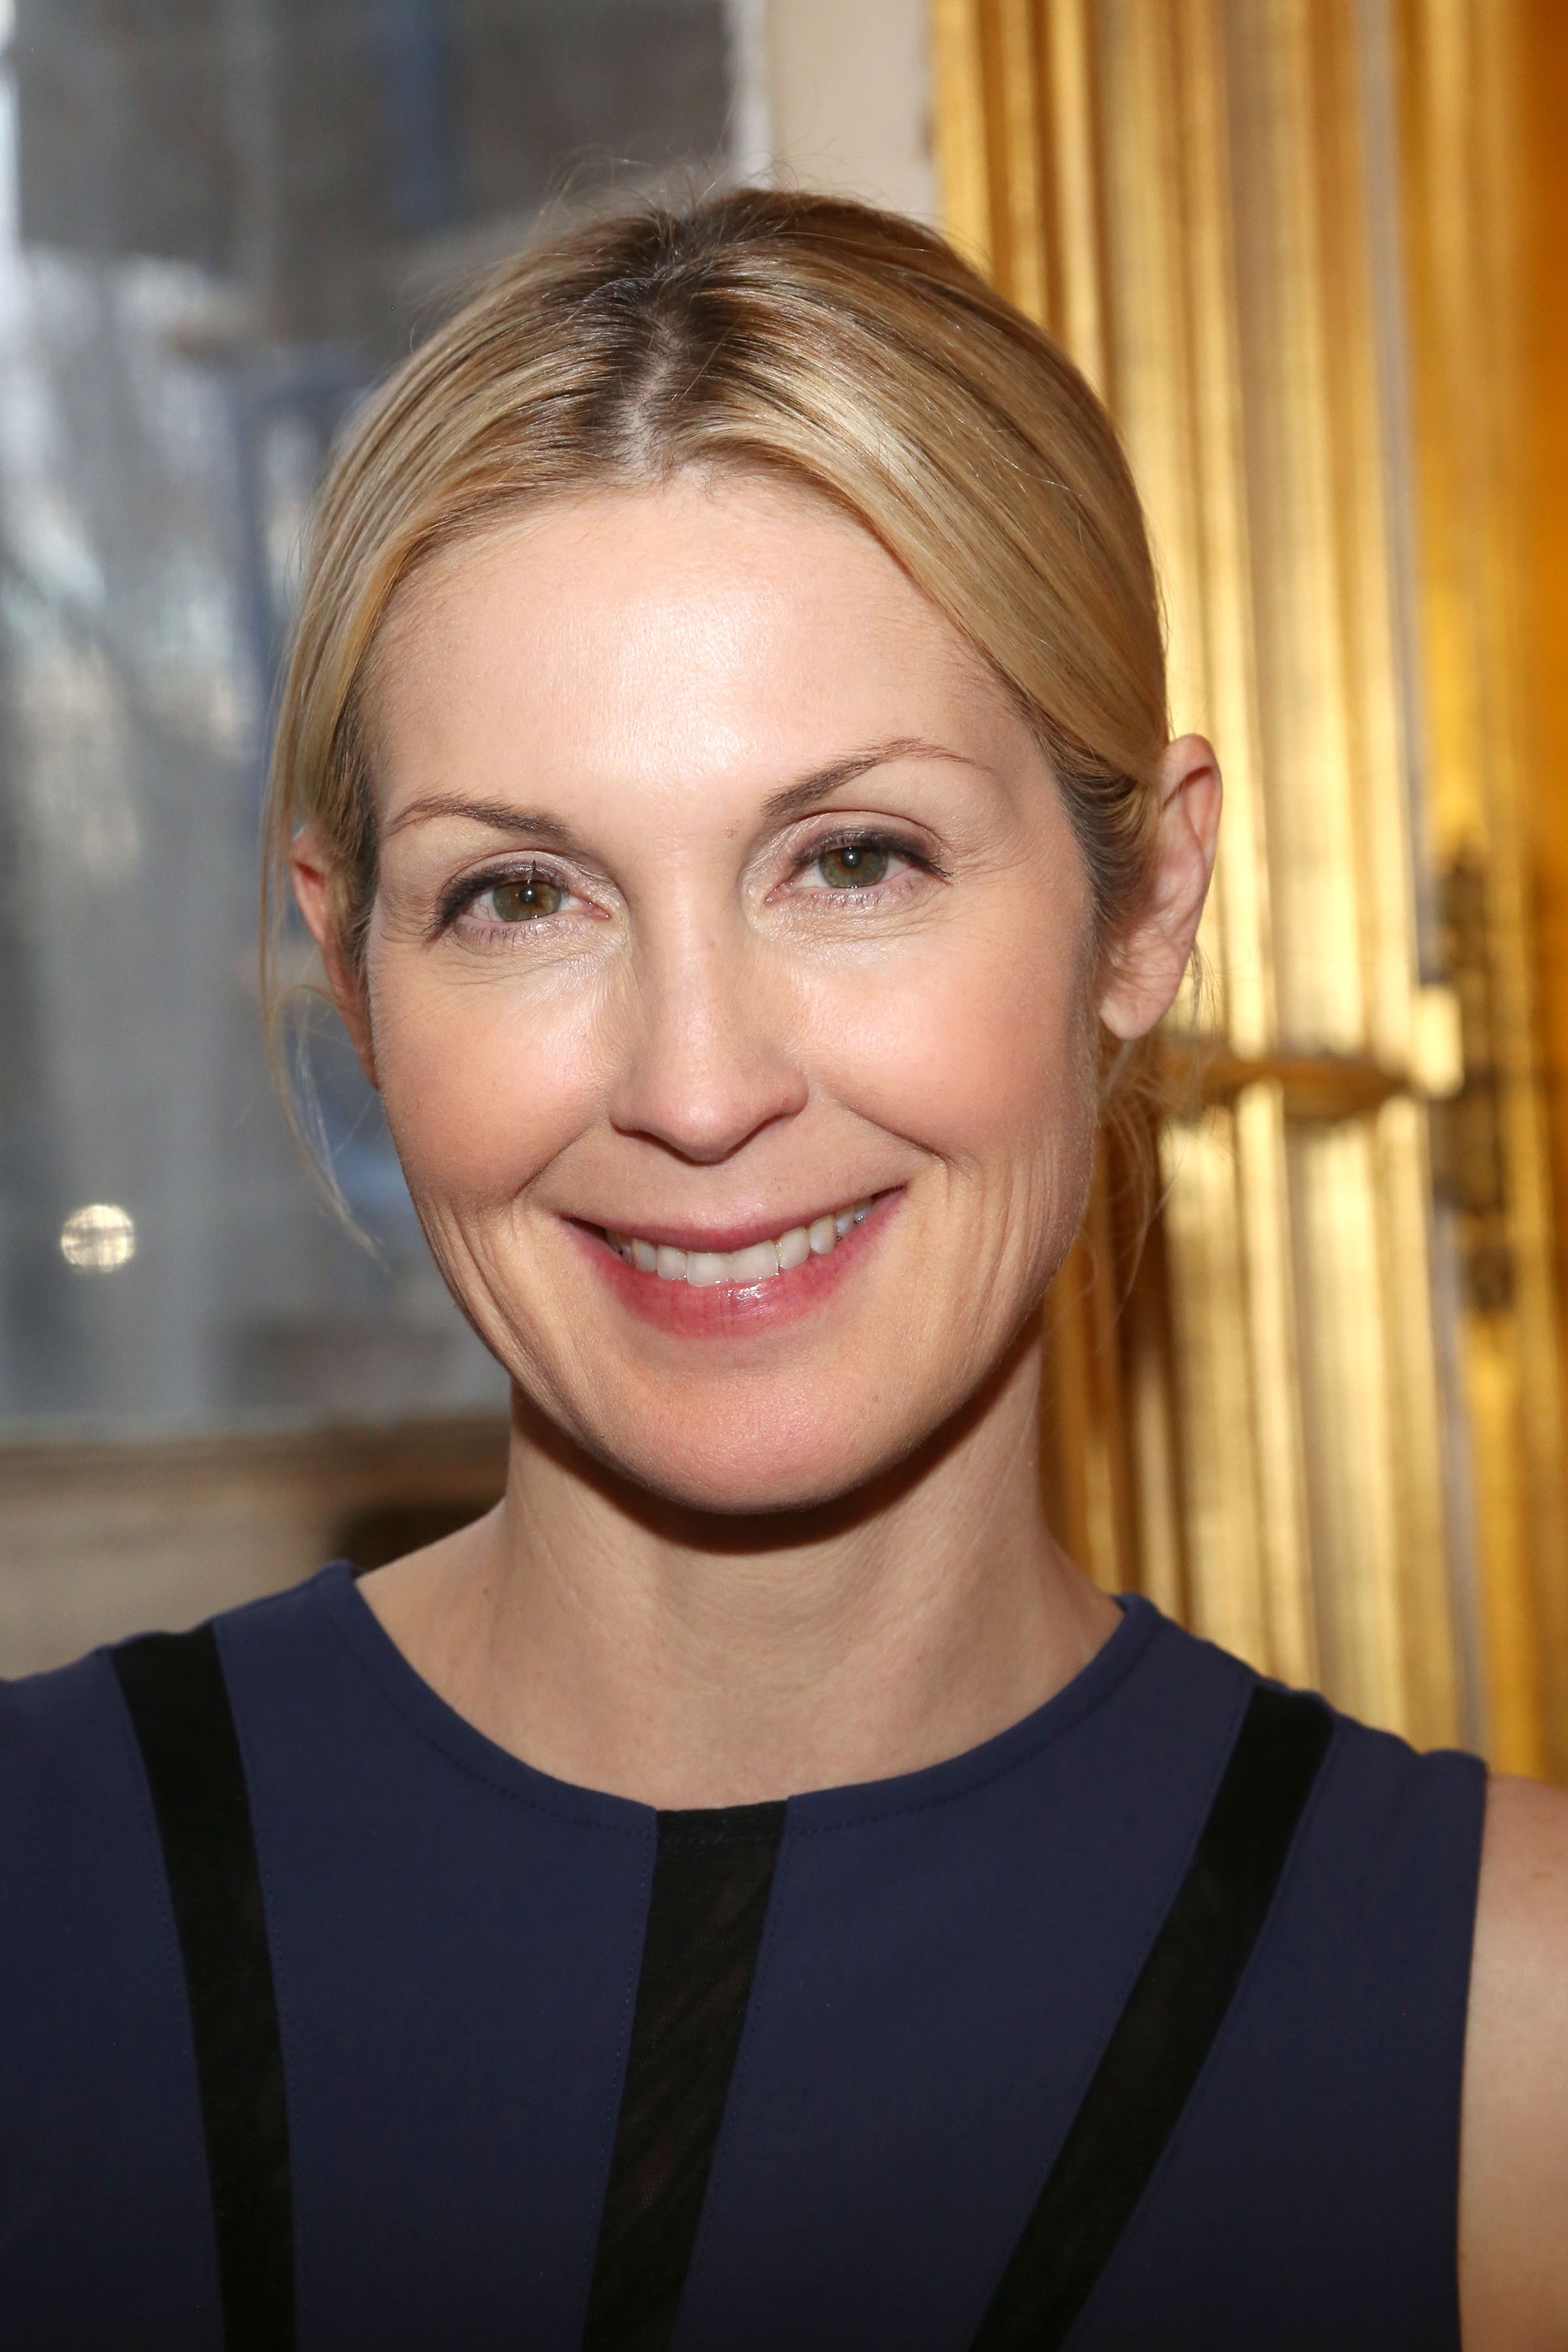 Pictures of Kelly Rutherford - Pictures Of Celebrities